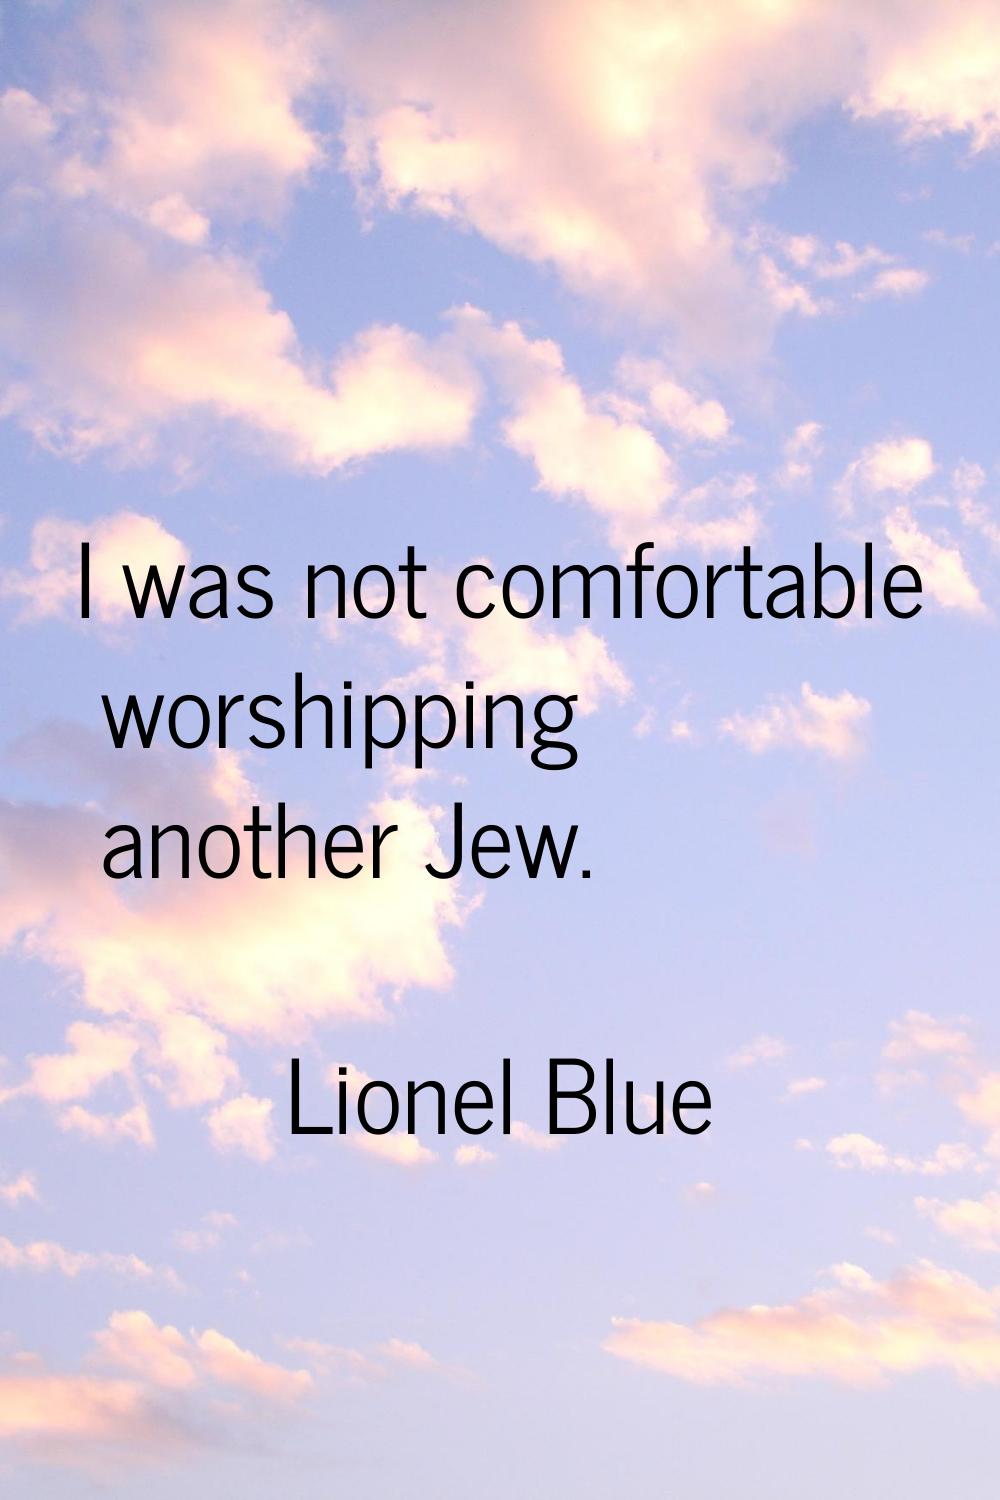 I was not comfortable worshipping another Jew.